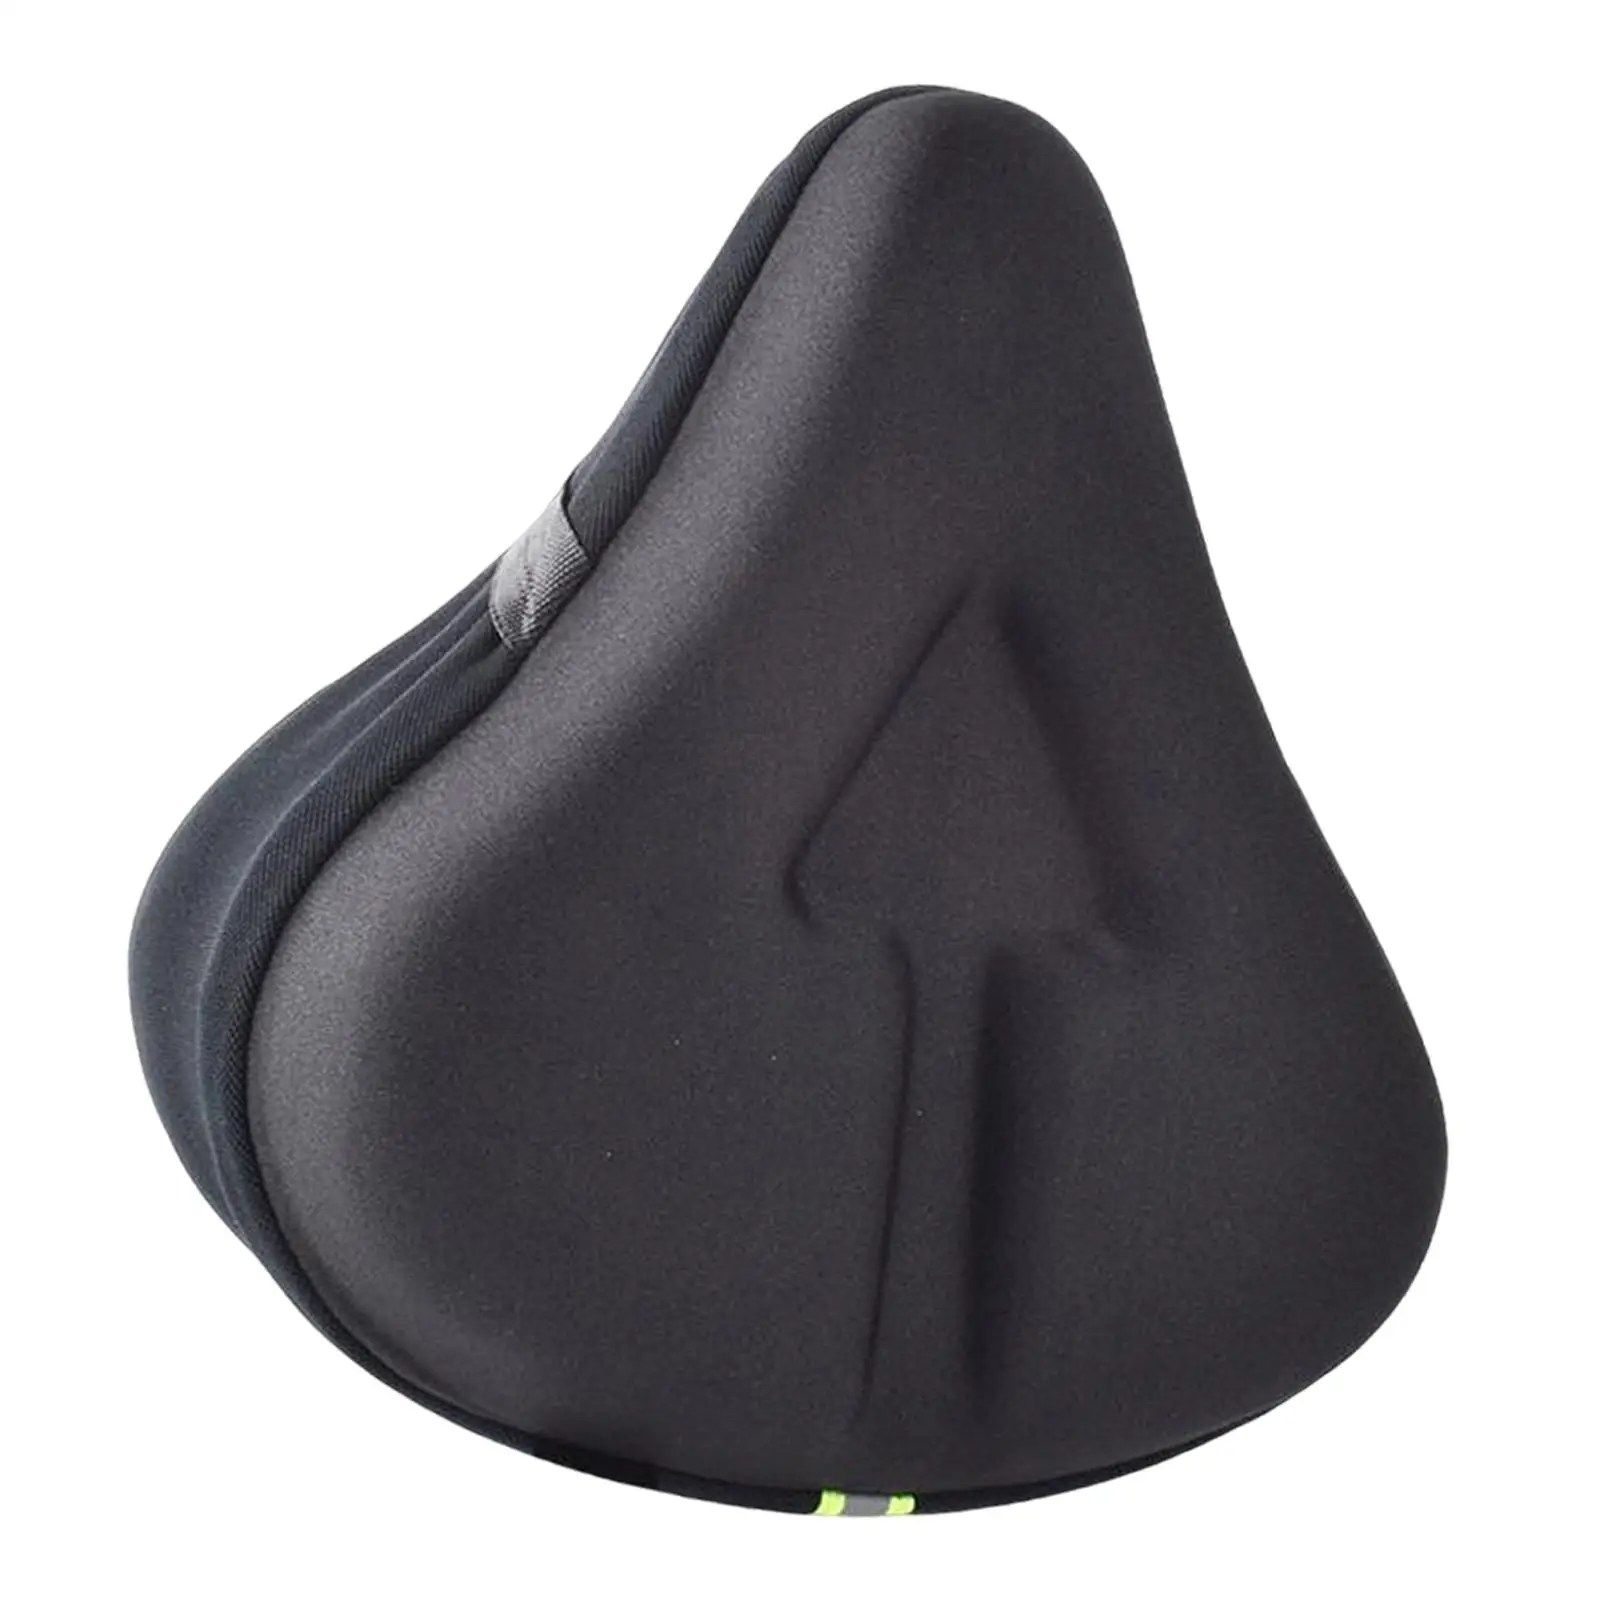 Wide Bike Seat Cushion Thicken Comfortable for  Stationary Bikes Seats